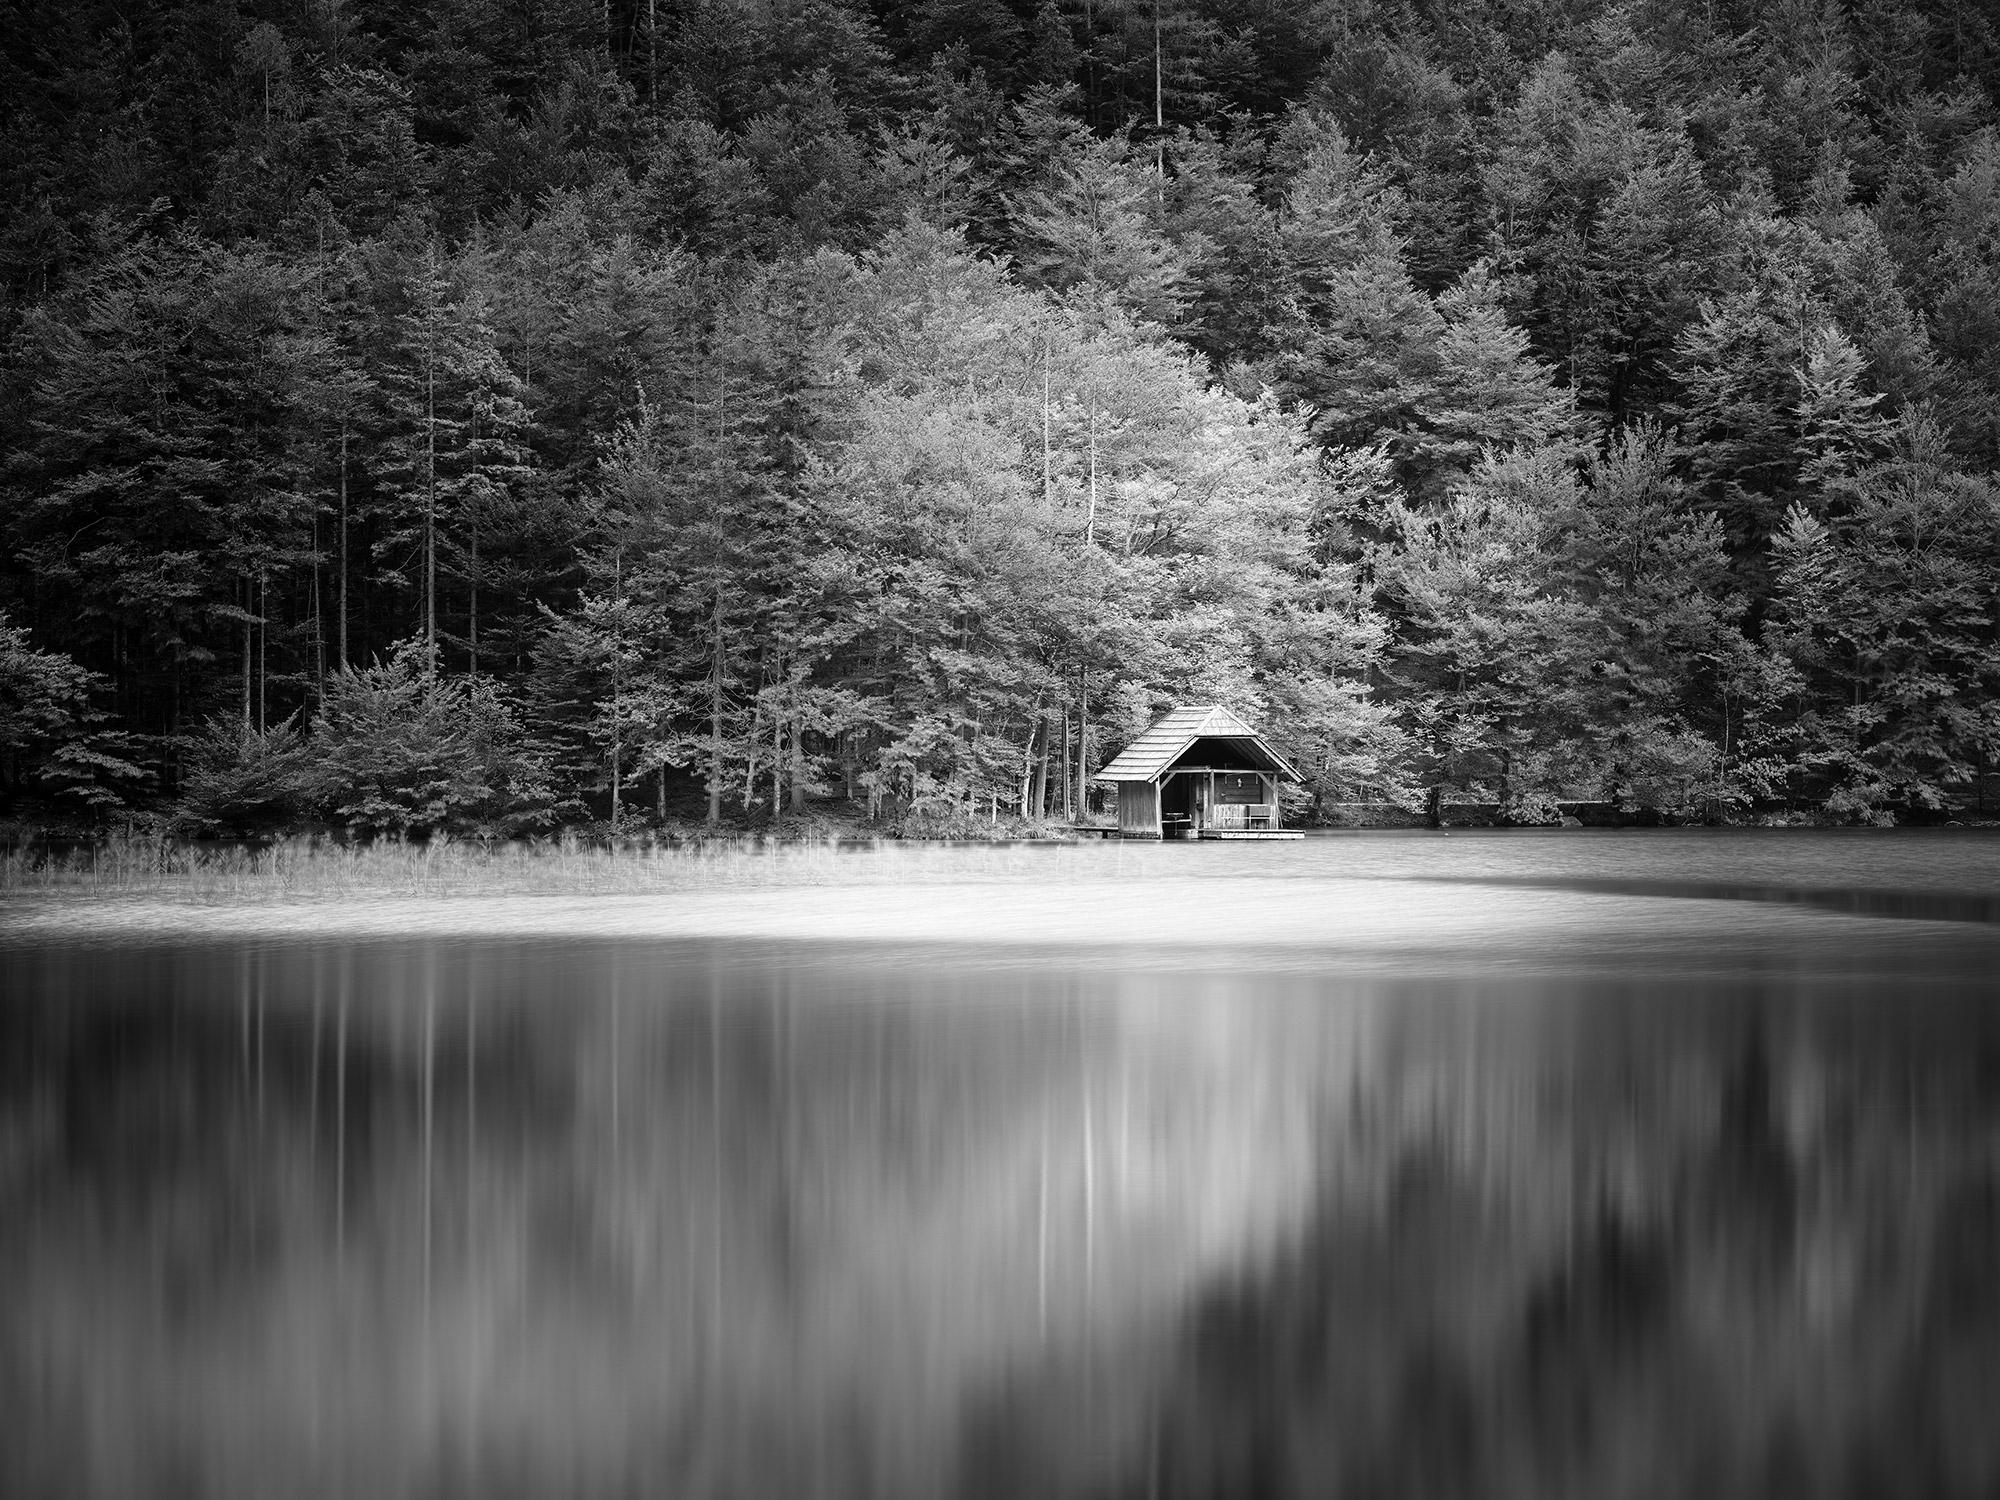 Wooden Boat House, Lake, Forest, Austria, black and white photography, landscape